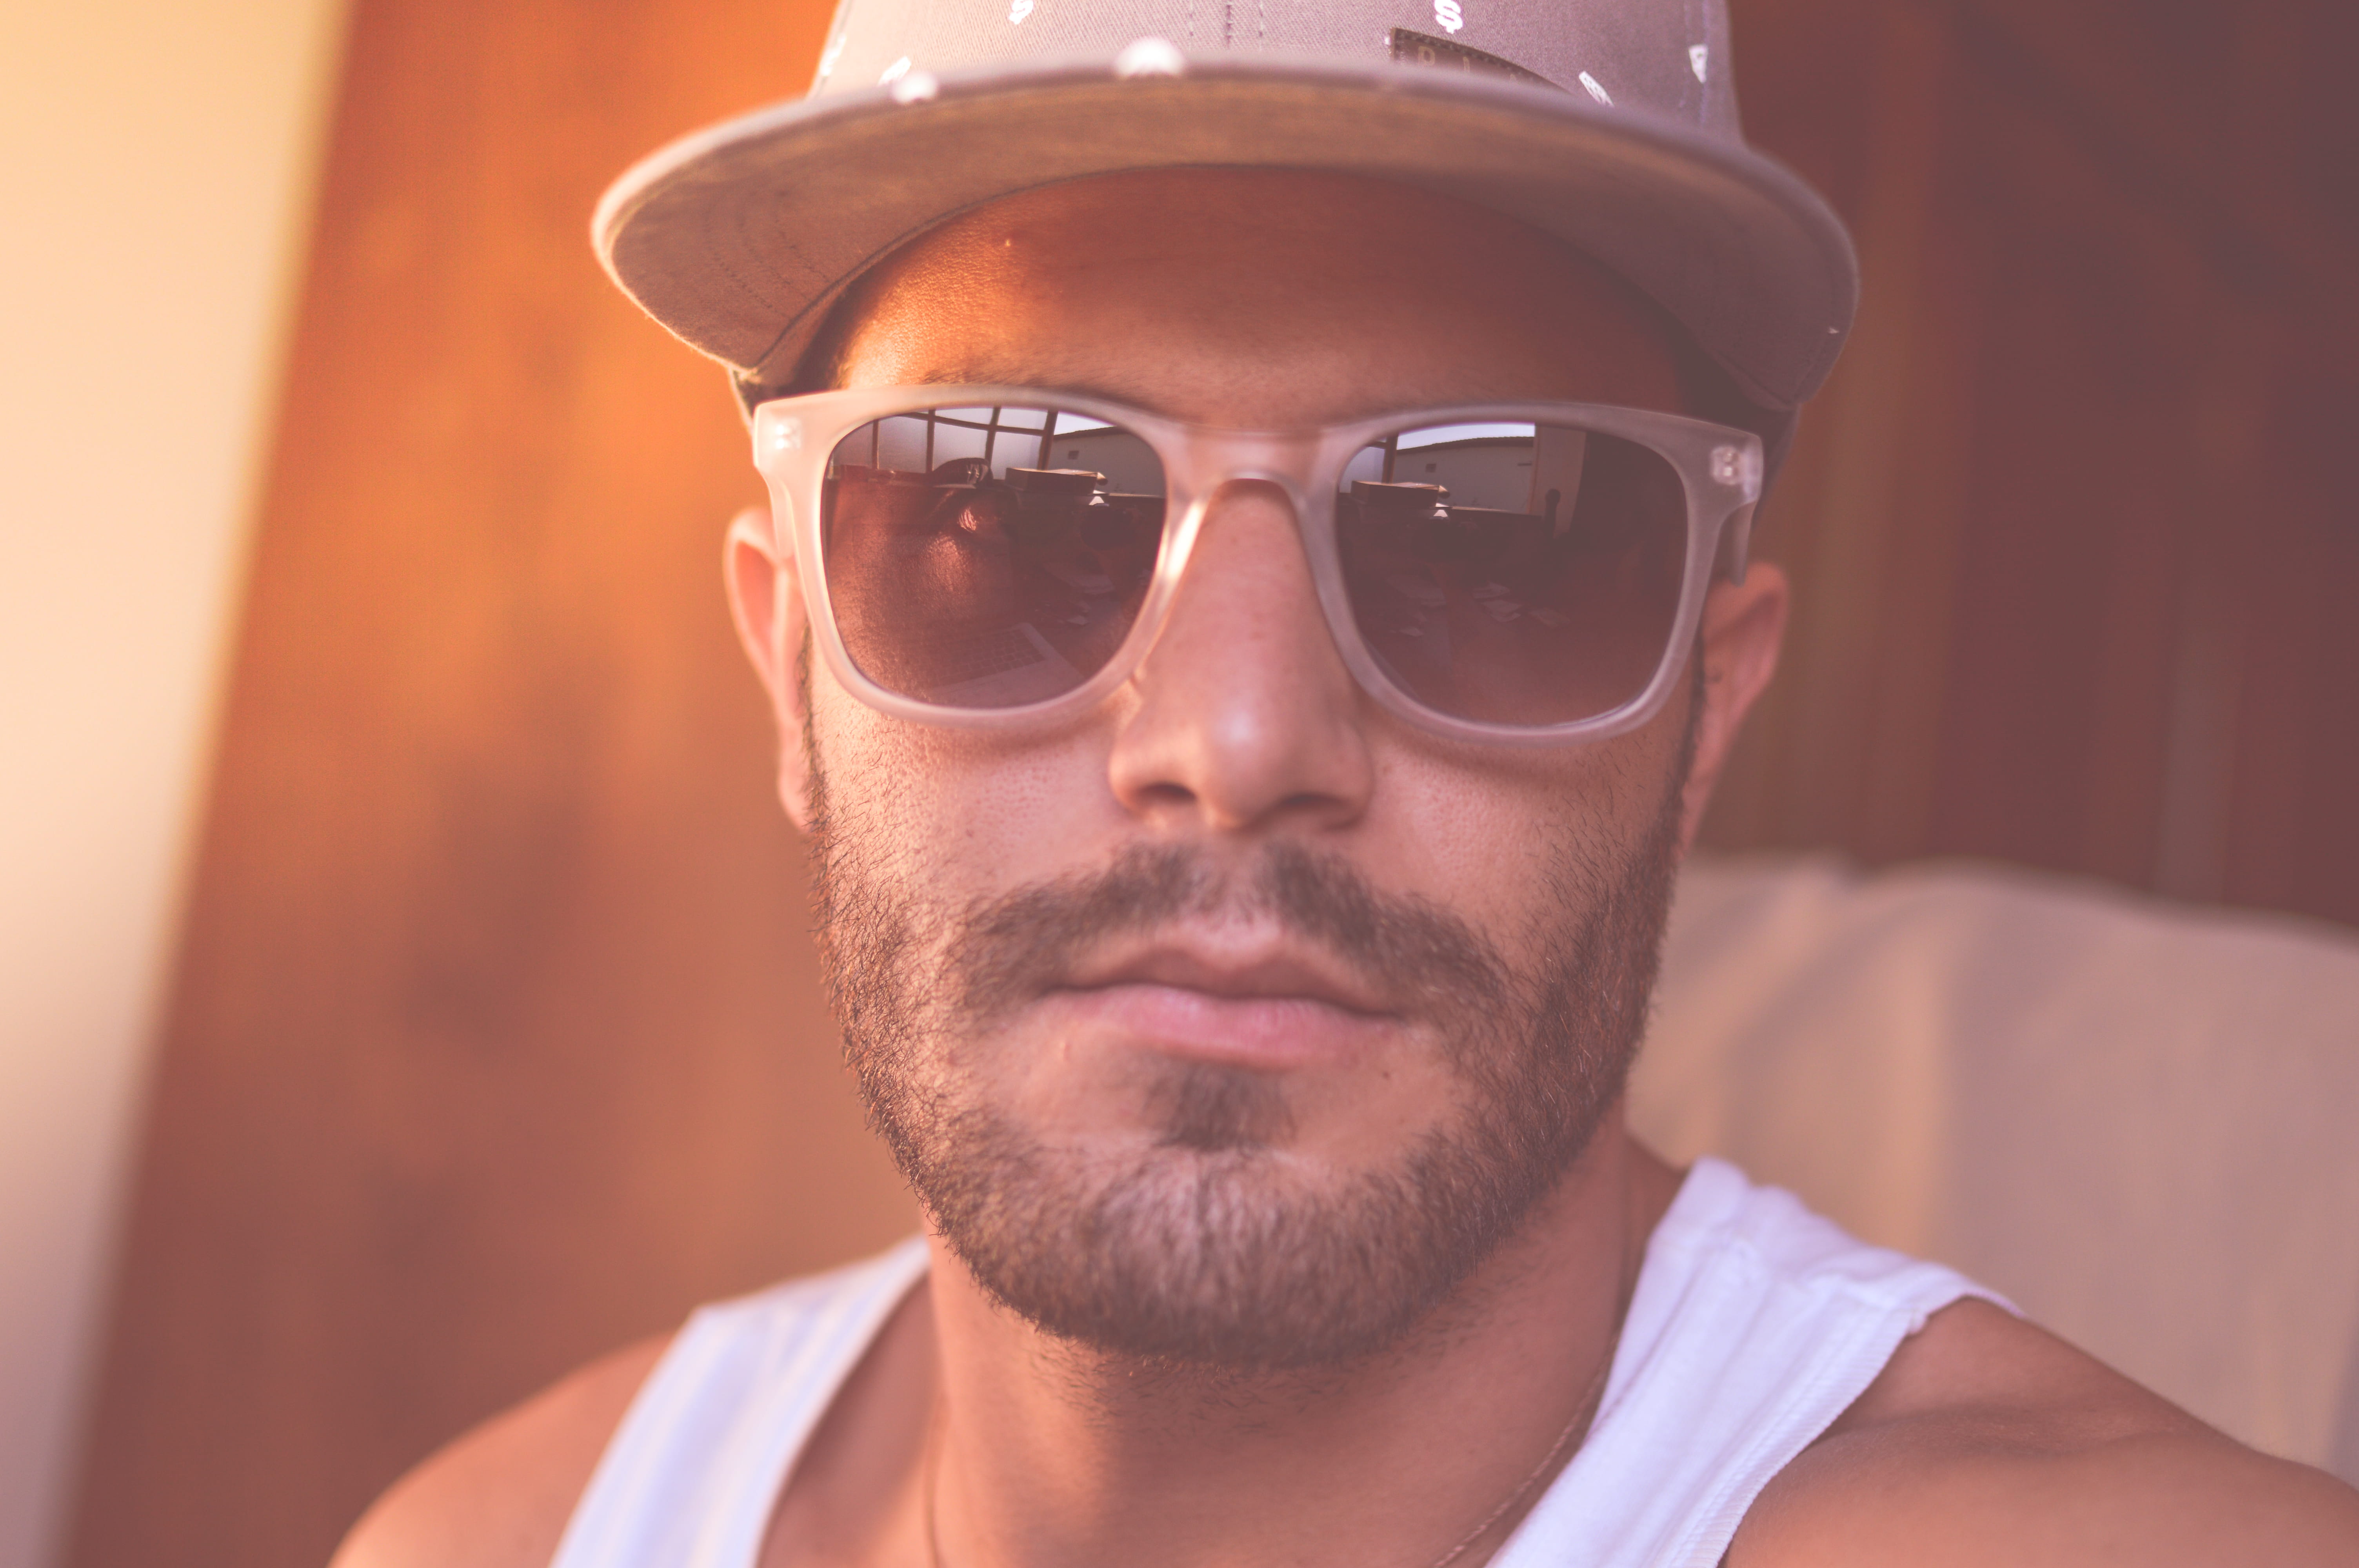 Man Wearing White Tank Top and Sunglasses Taking Close-up Selfie